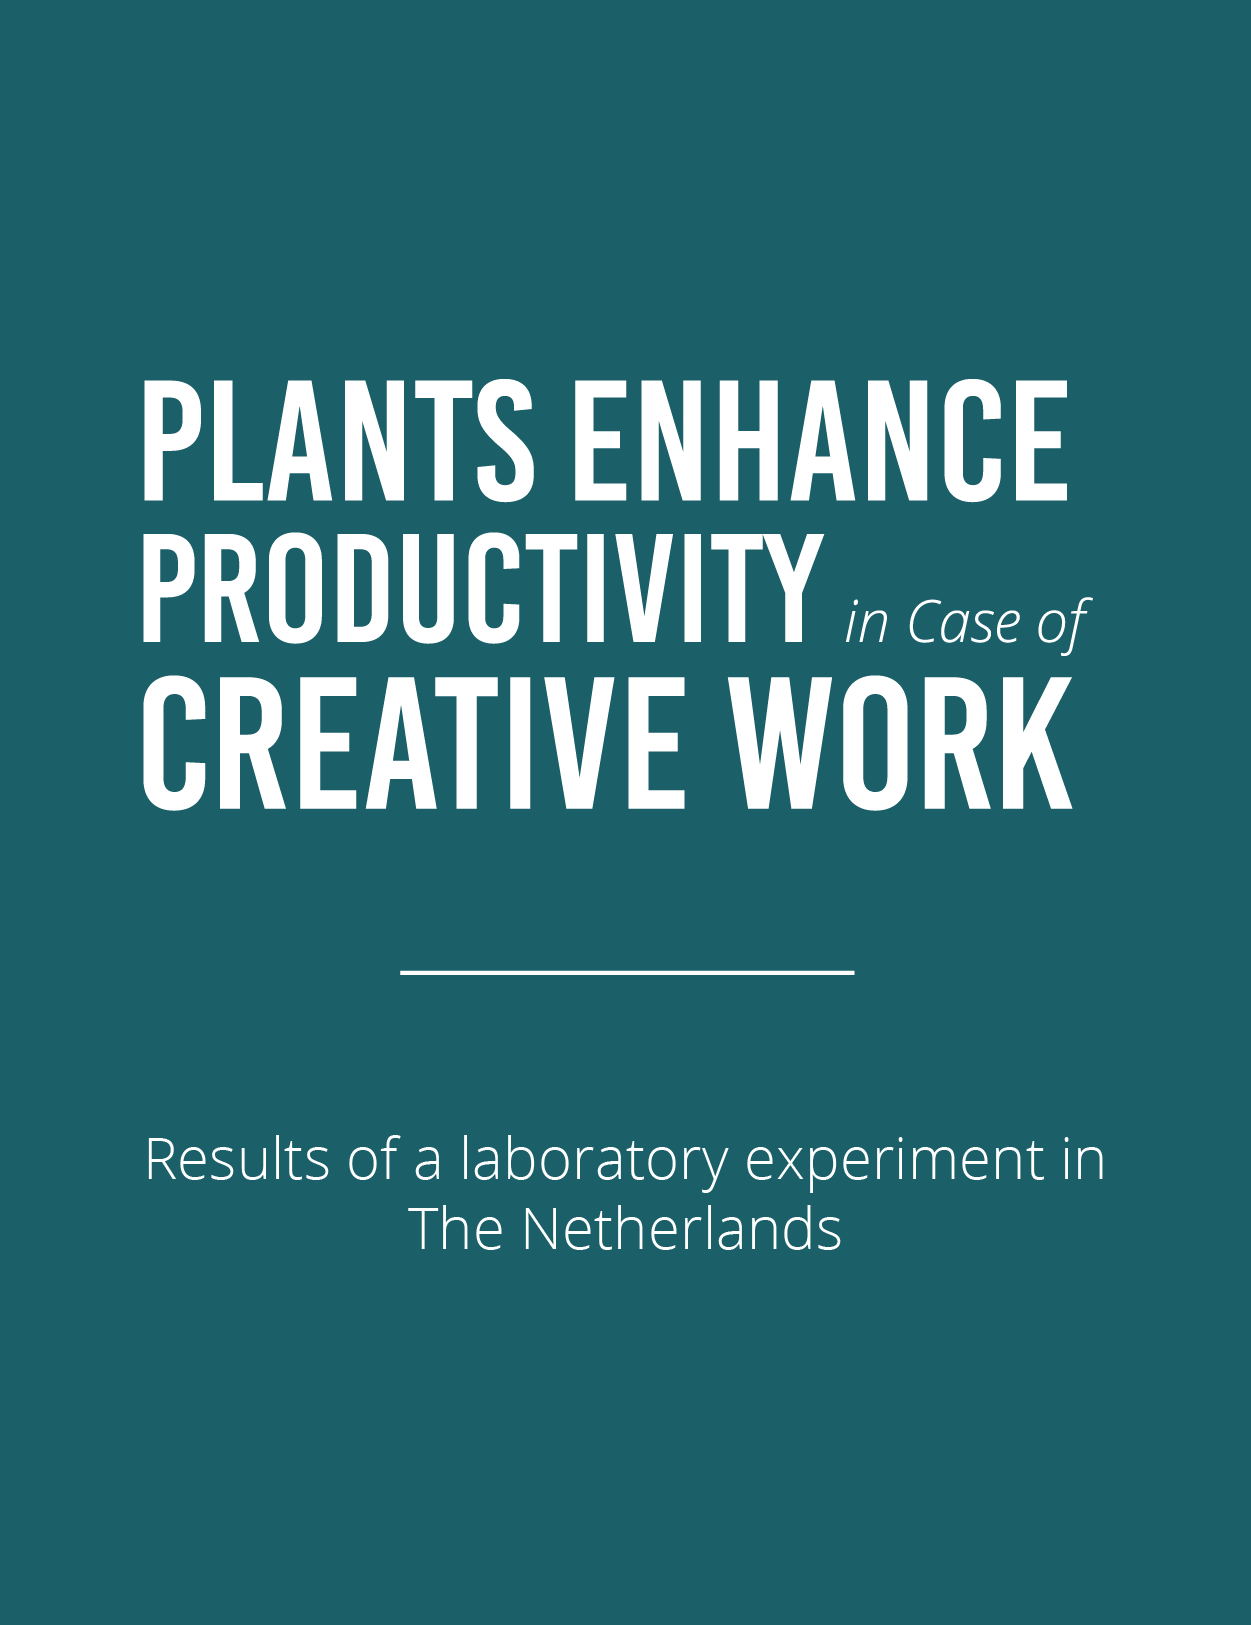 Plants Enhance Productivity in Case of Creative WorkFeatured Image